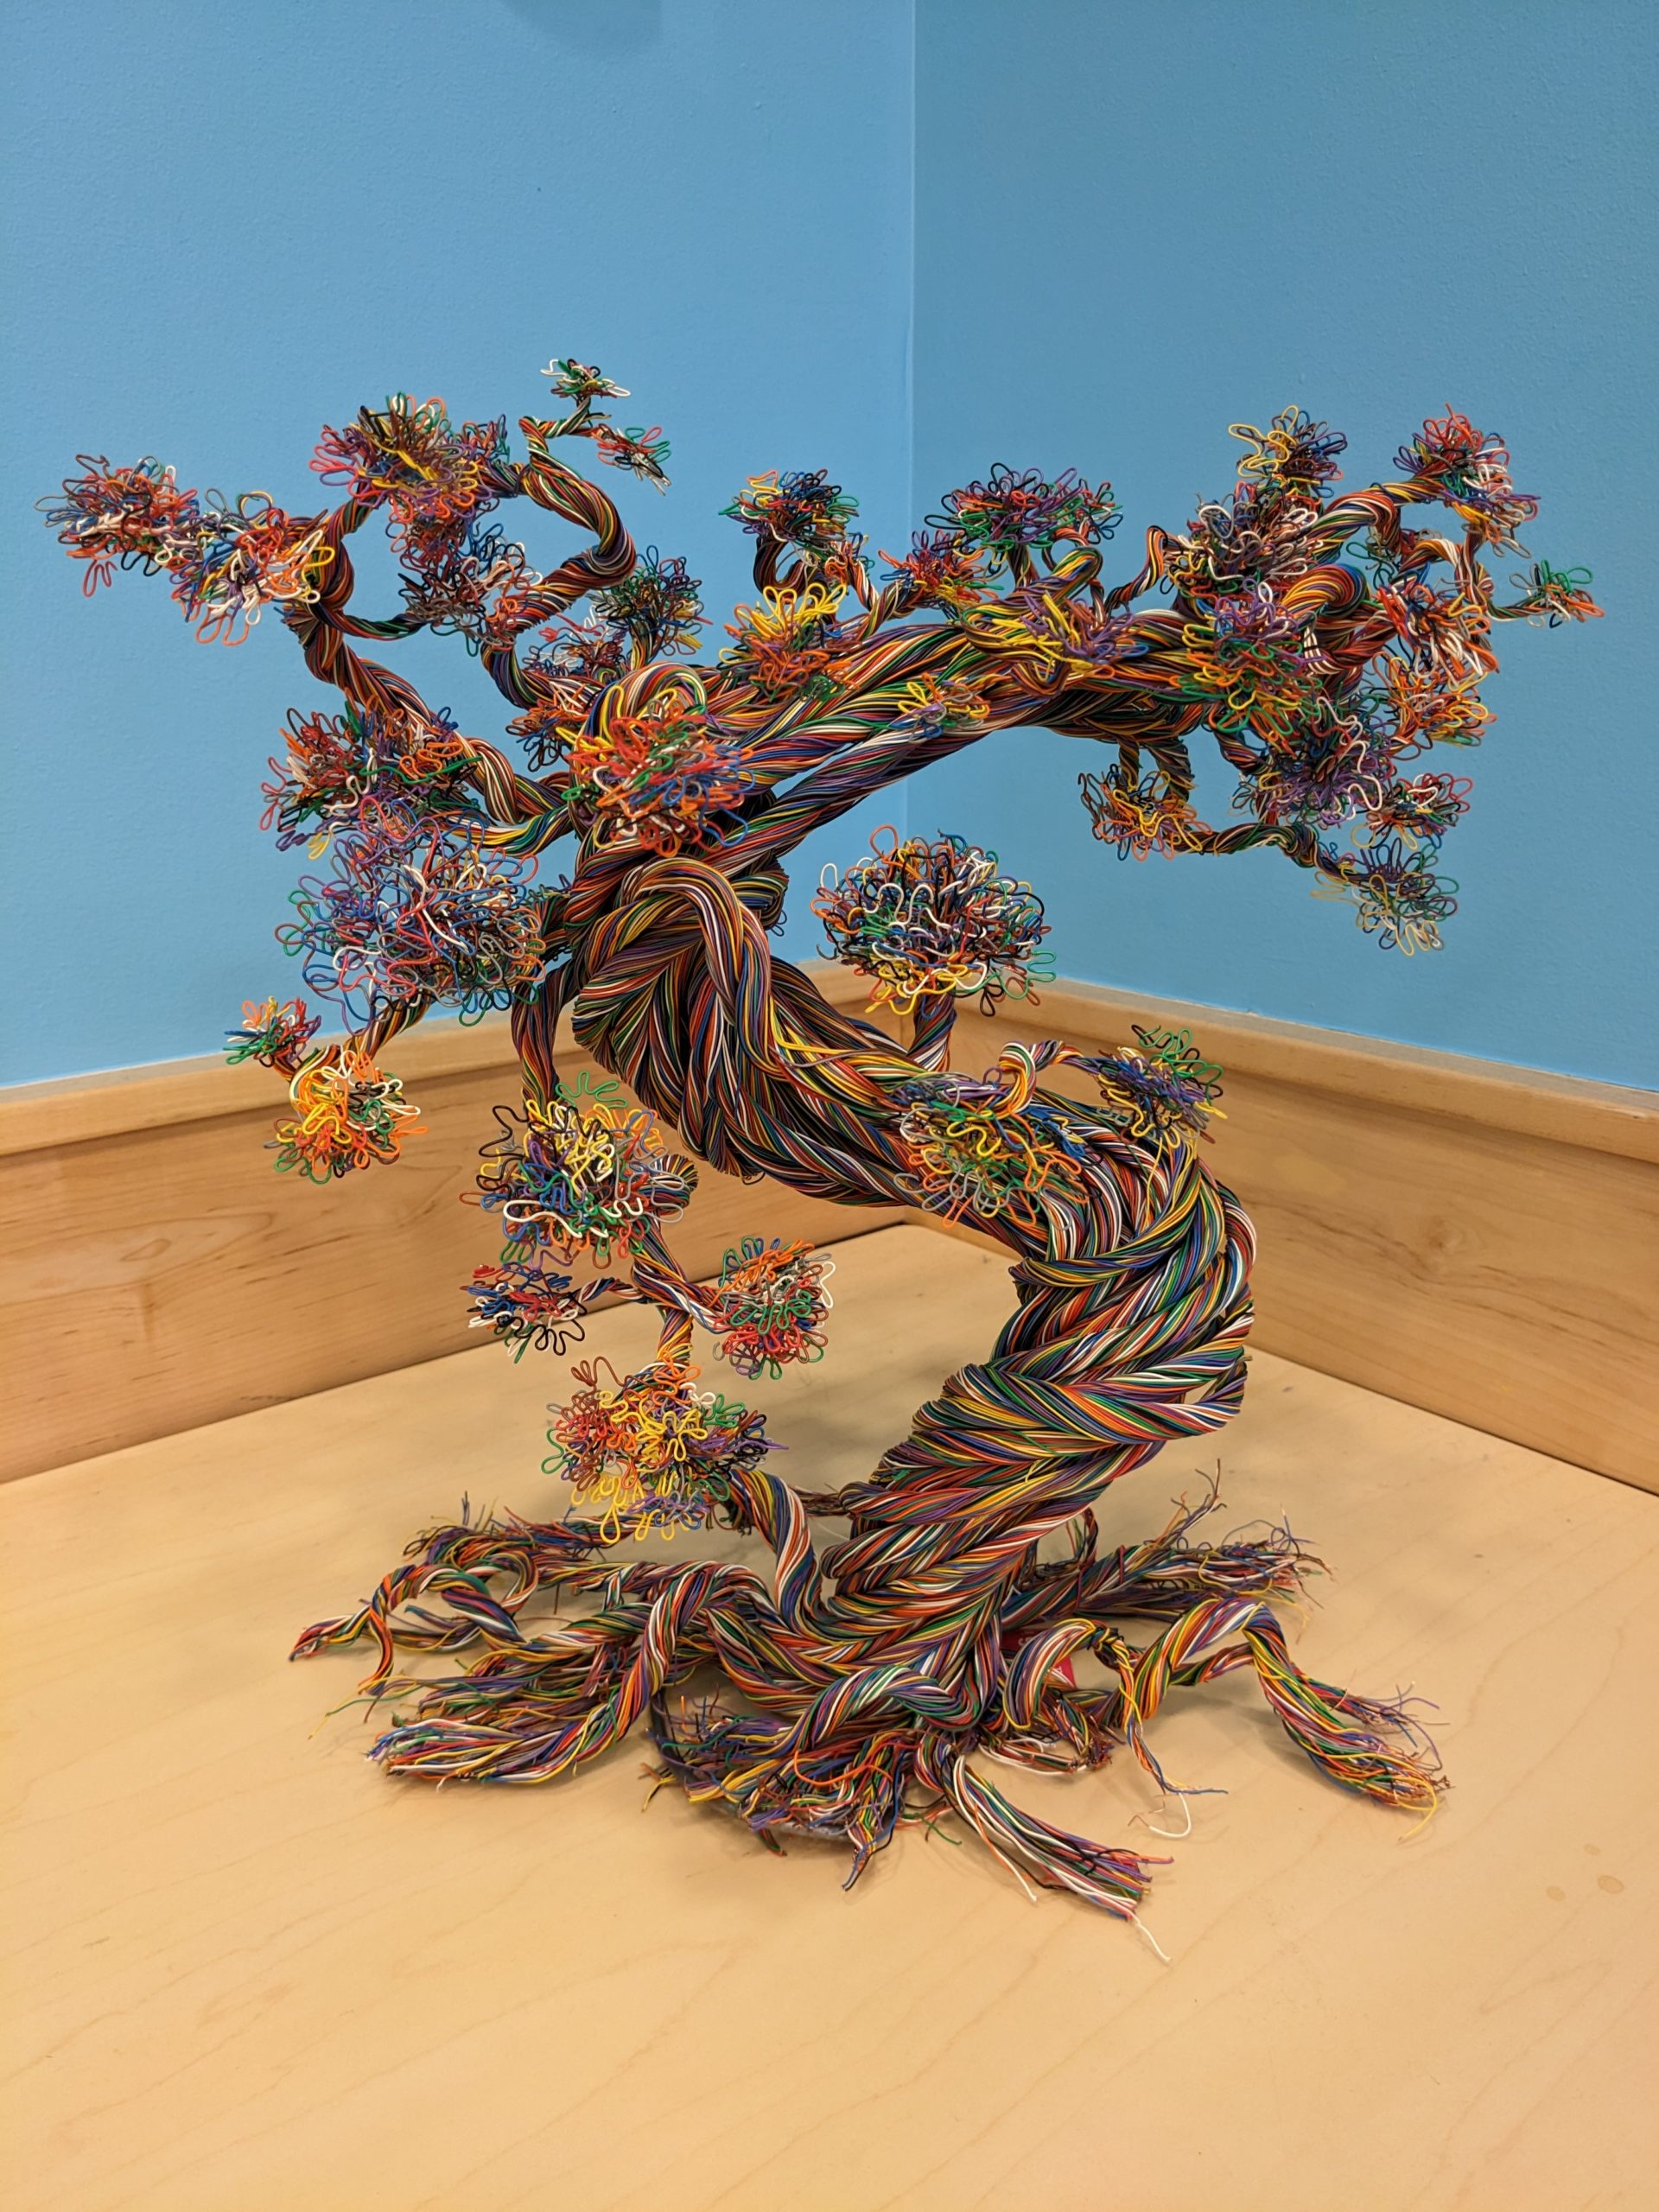 Completed Bonsai Tree crated by twisting bundles of telephone cable together